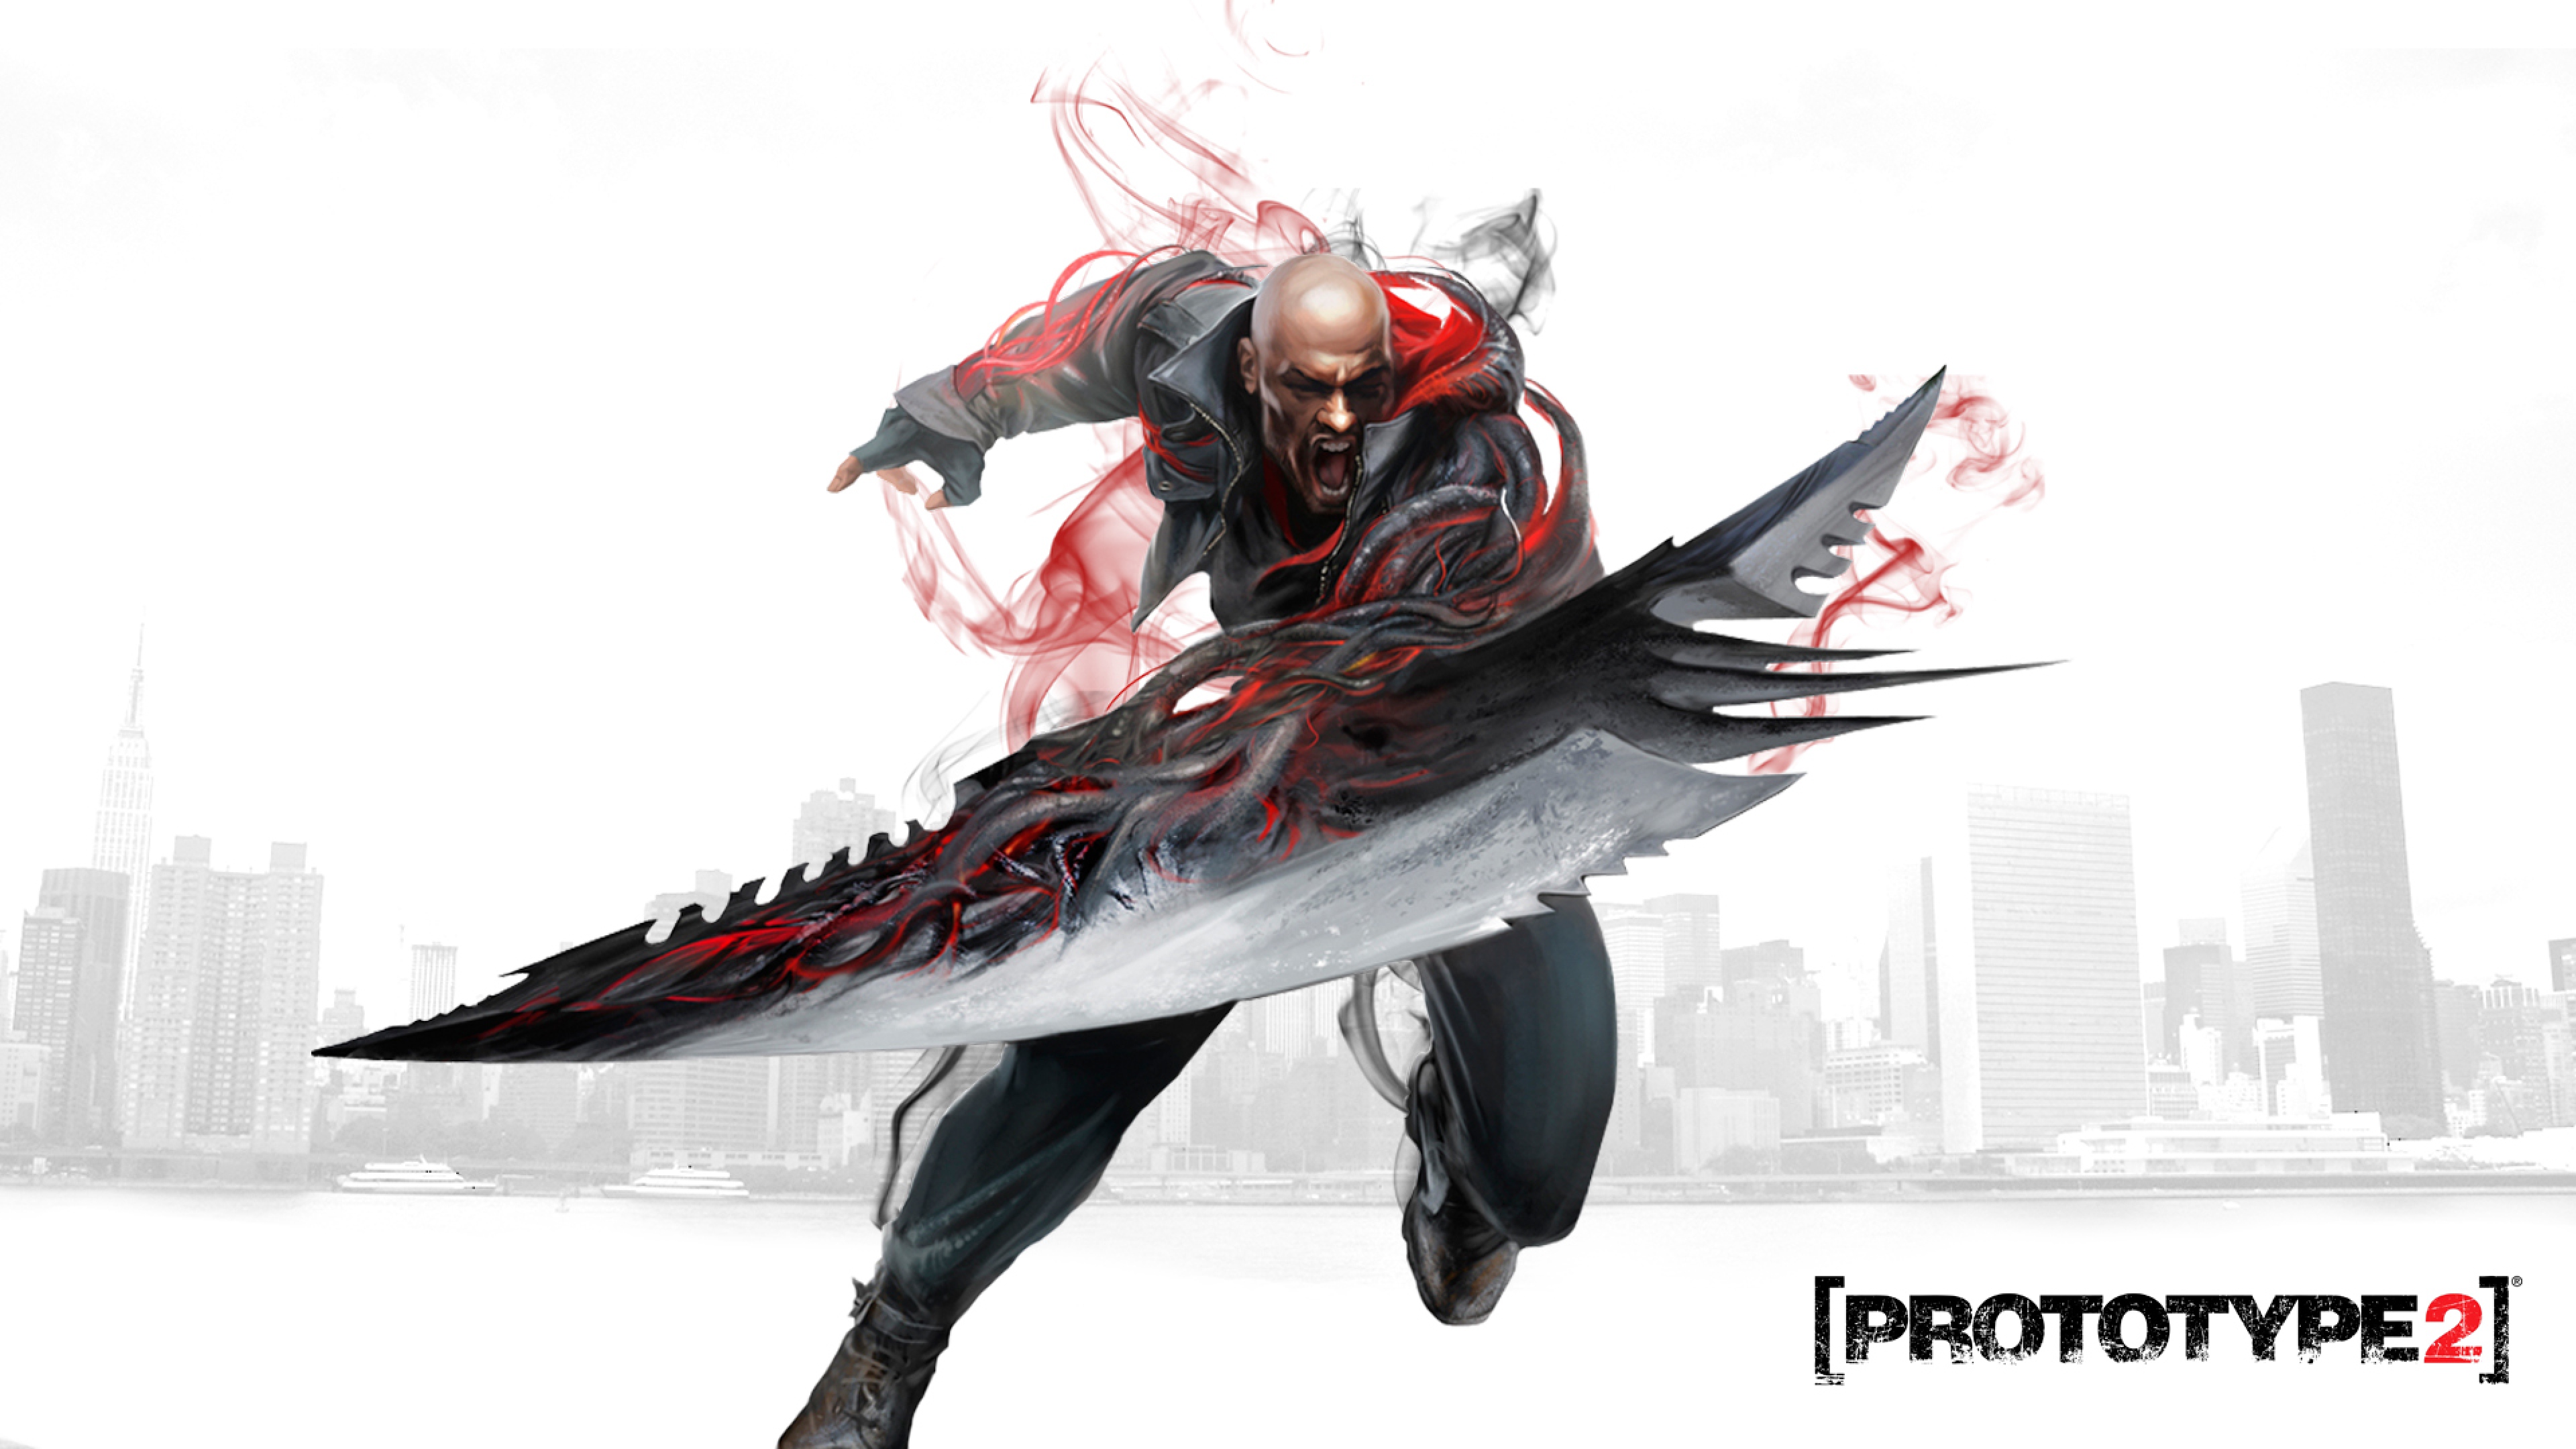 prototype 2 weapons and powers list